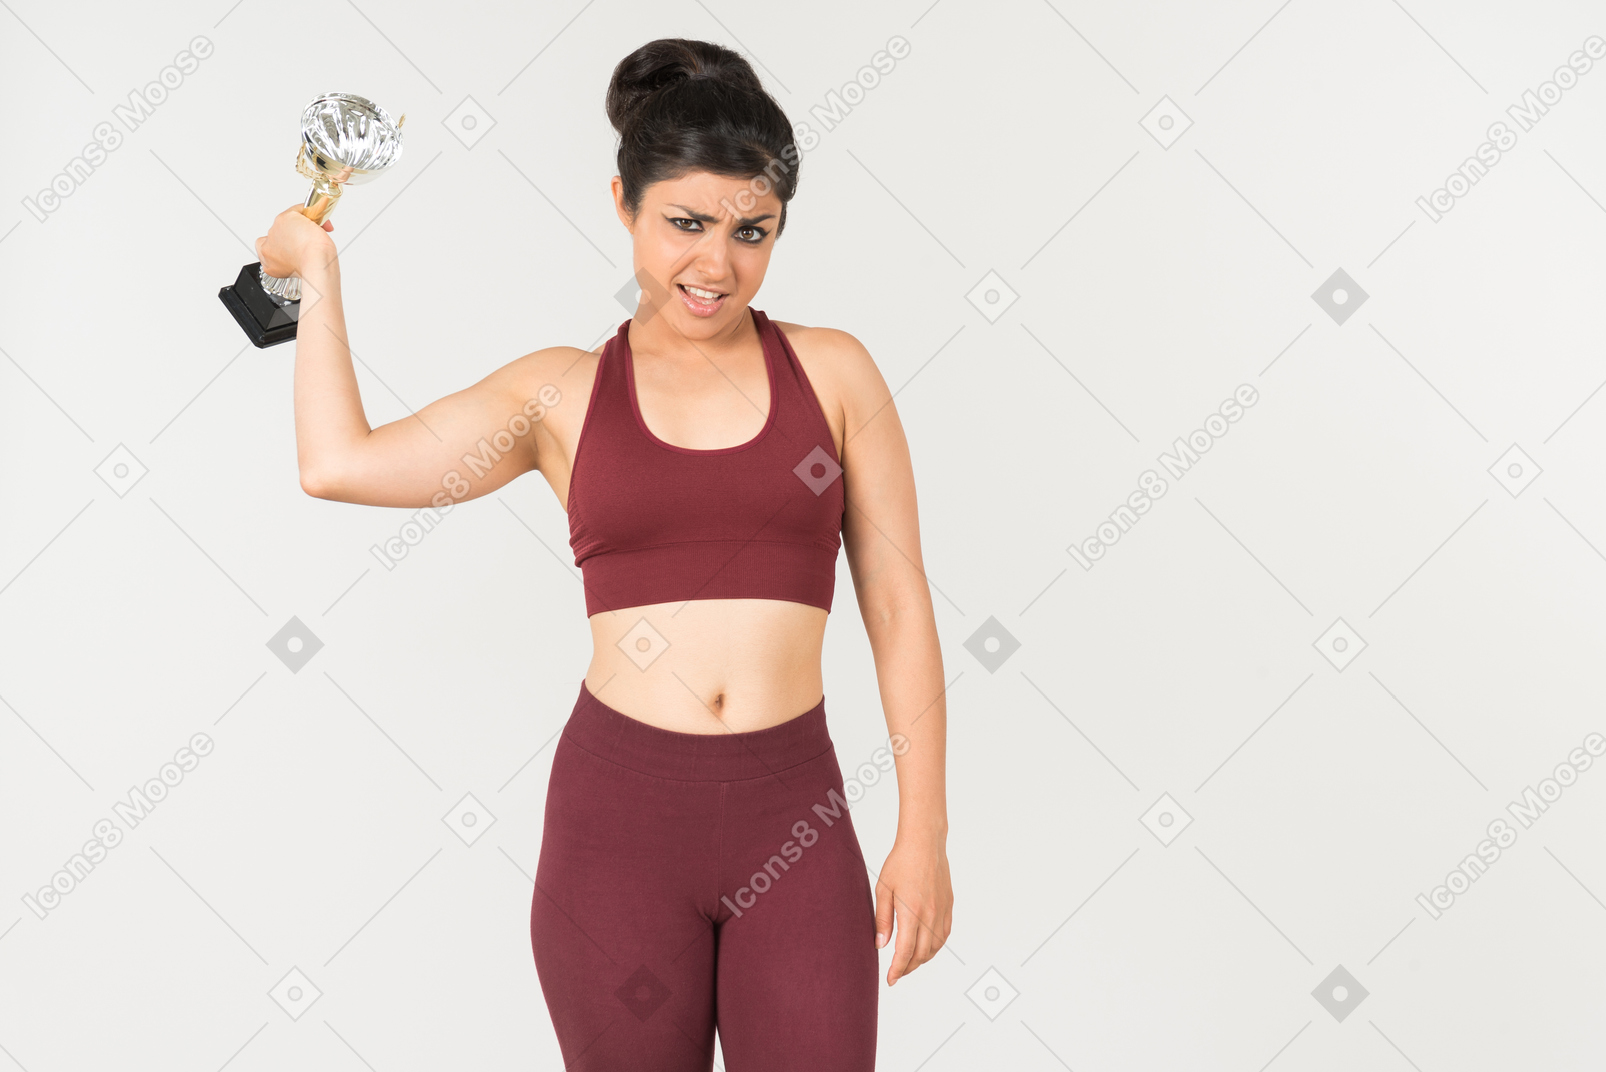 Angry looking young indian woman holding award